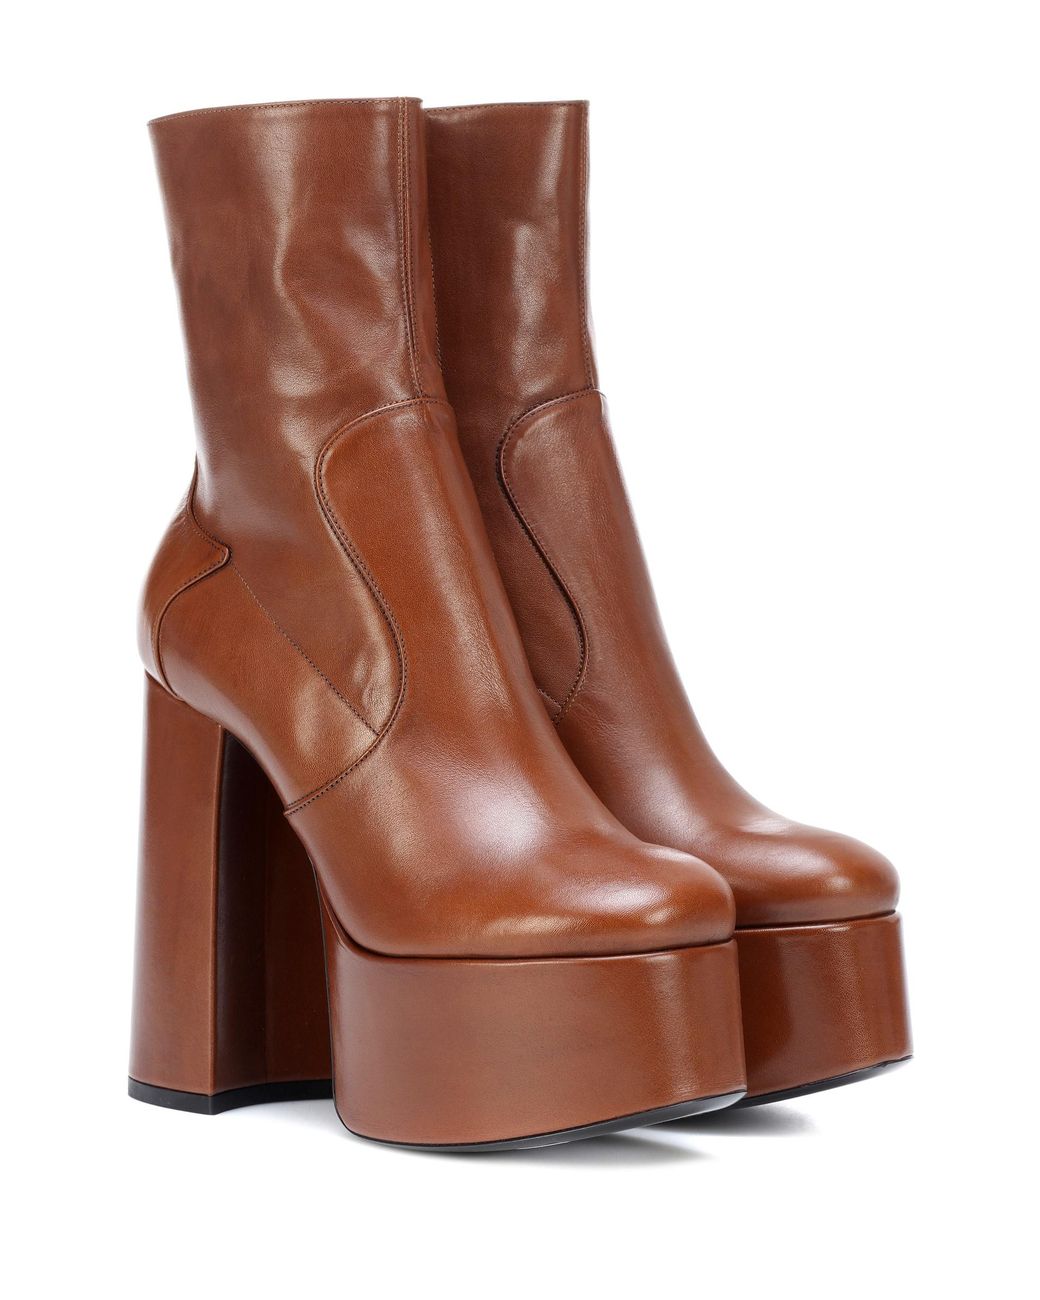 Saint Laurent Billy 140 Leather Ankle Boots in Brown | Lyst